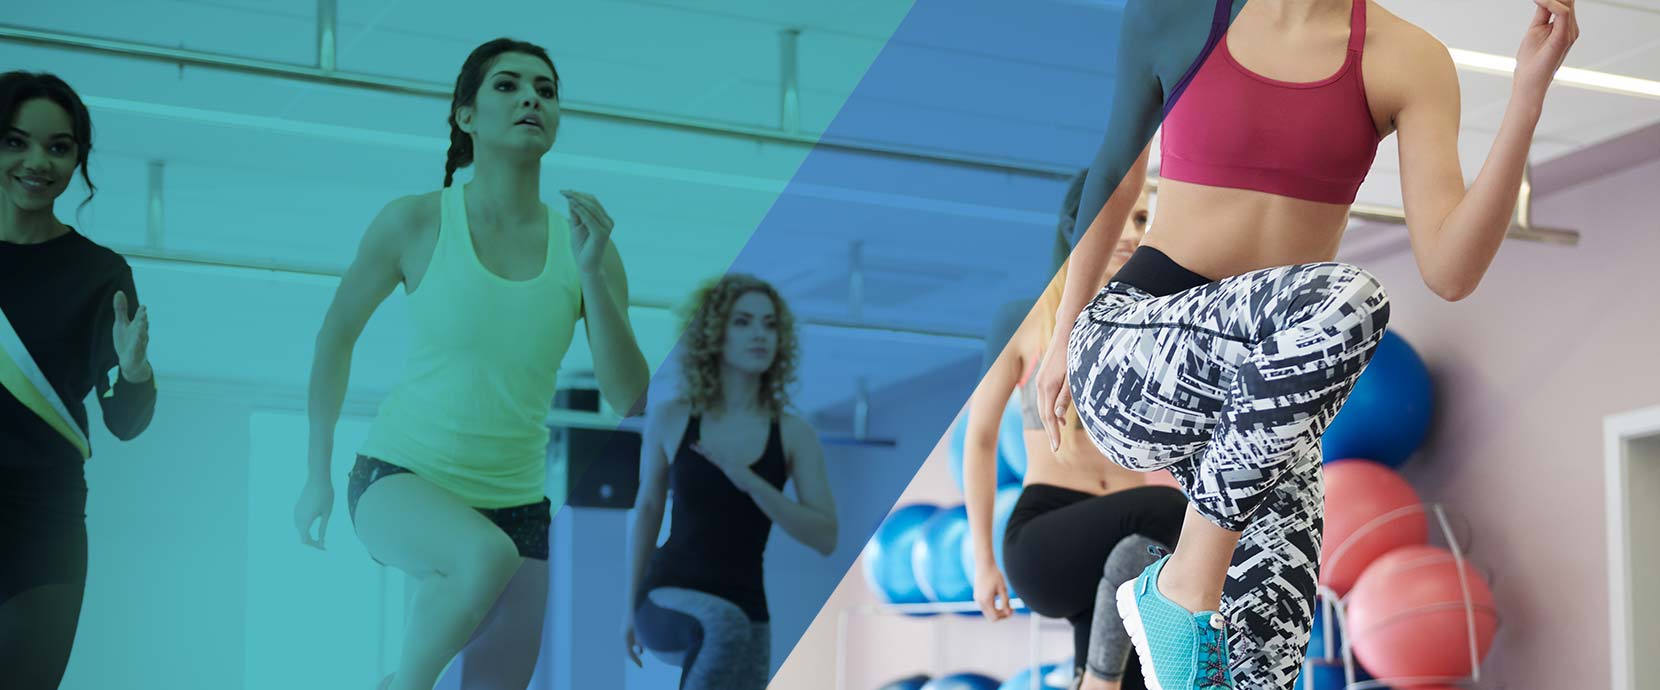 All the features that you need for your aerobic studio